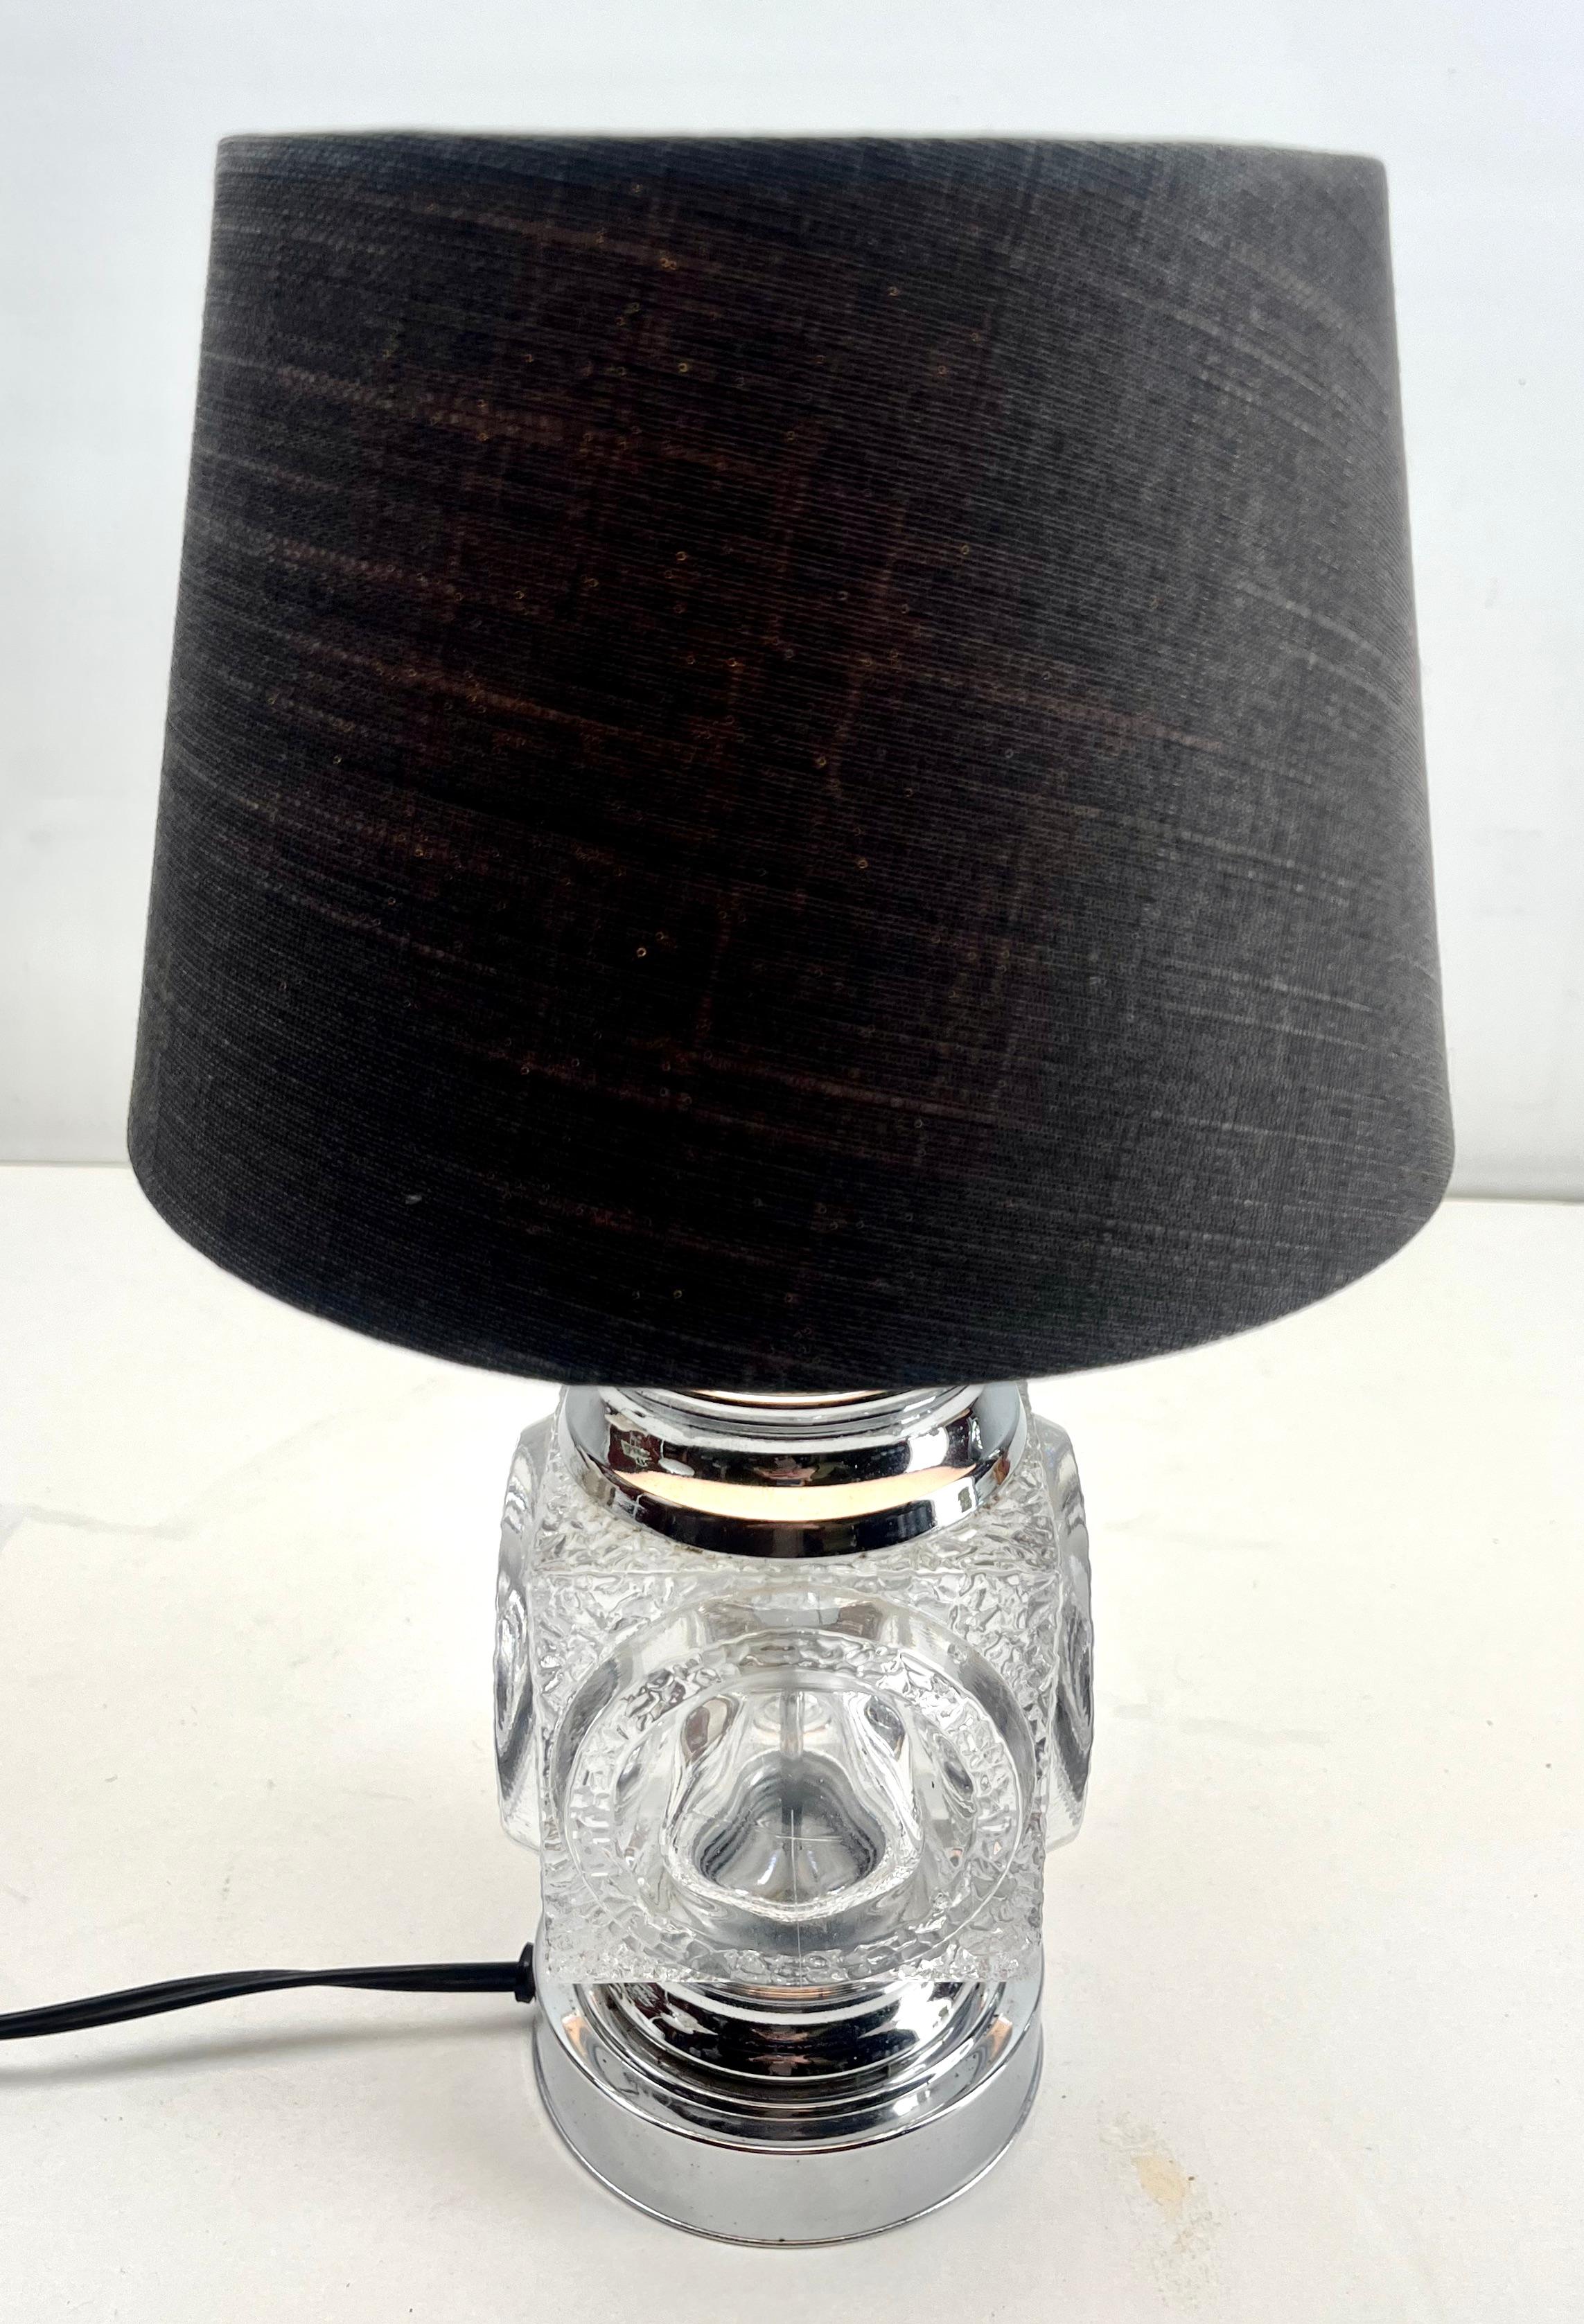 Vintage Peill & Putzler ice cube table lamp in chrome and crystal glass.
The sizes are measured without lamp shade.

The lamp is sold without the lampshade.
And in full working order.
New power cable
And safe for immediate usage in the